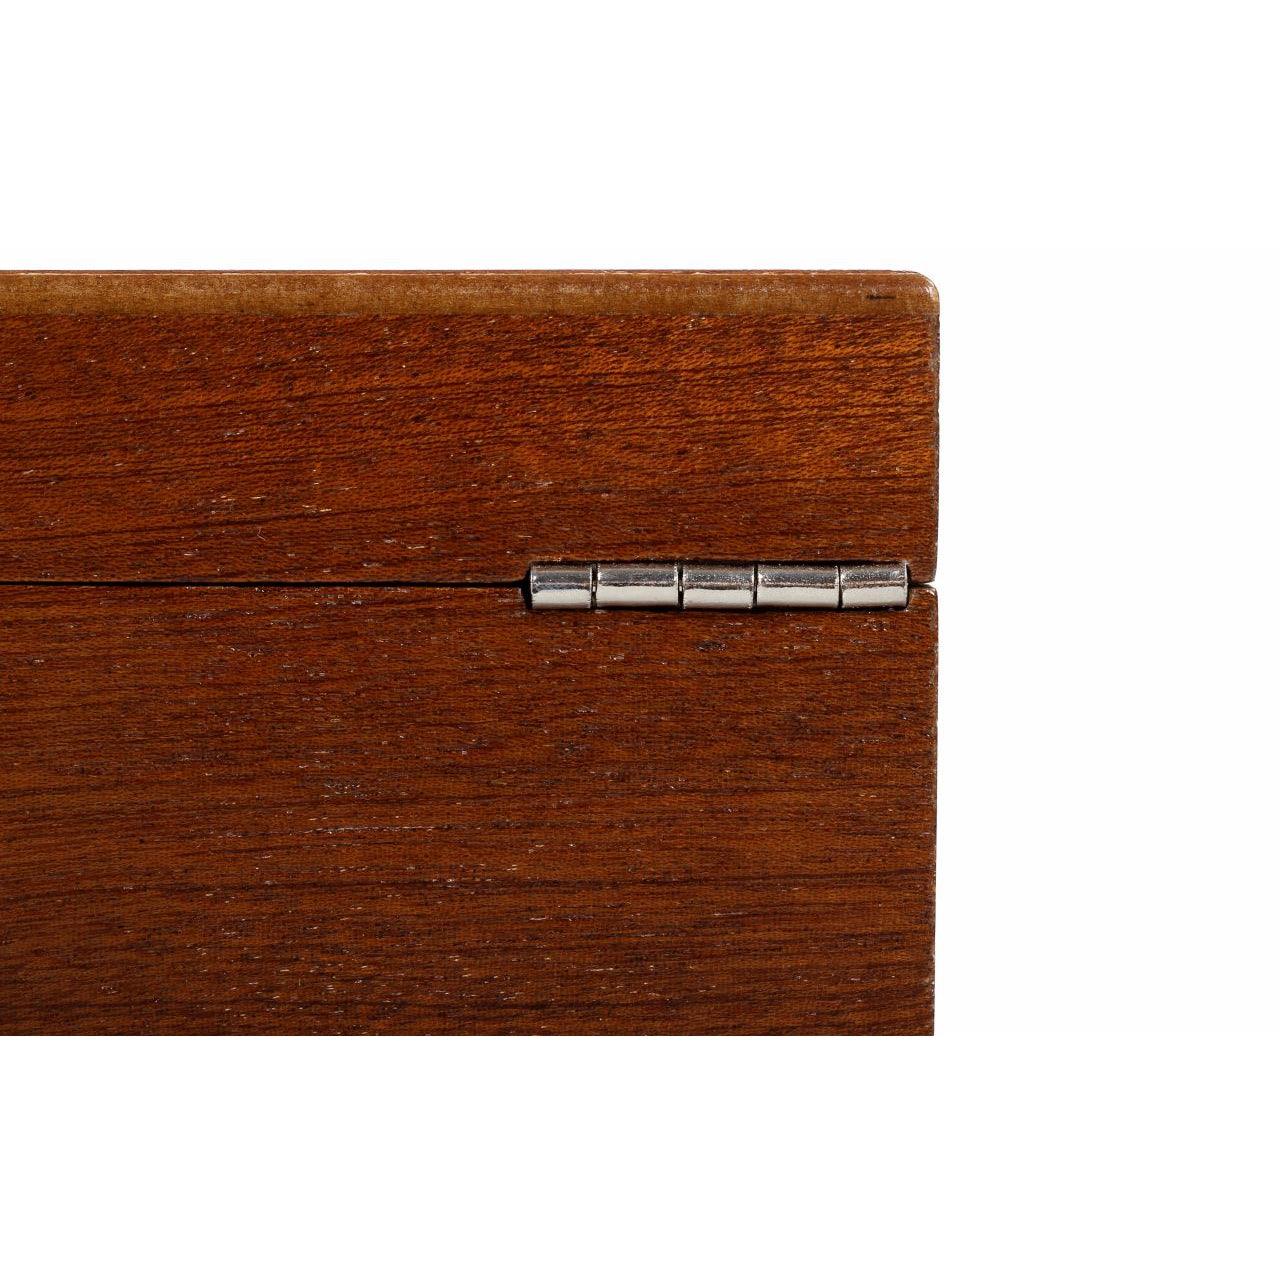 High-quality storage box for chess pieces Mahogany